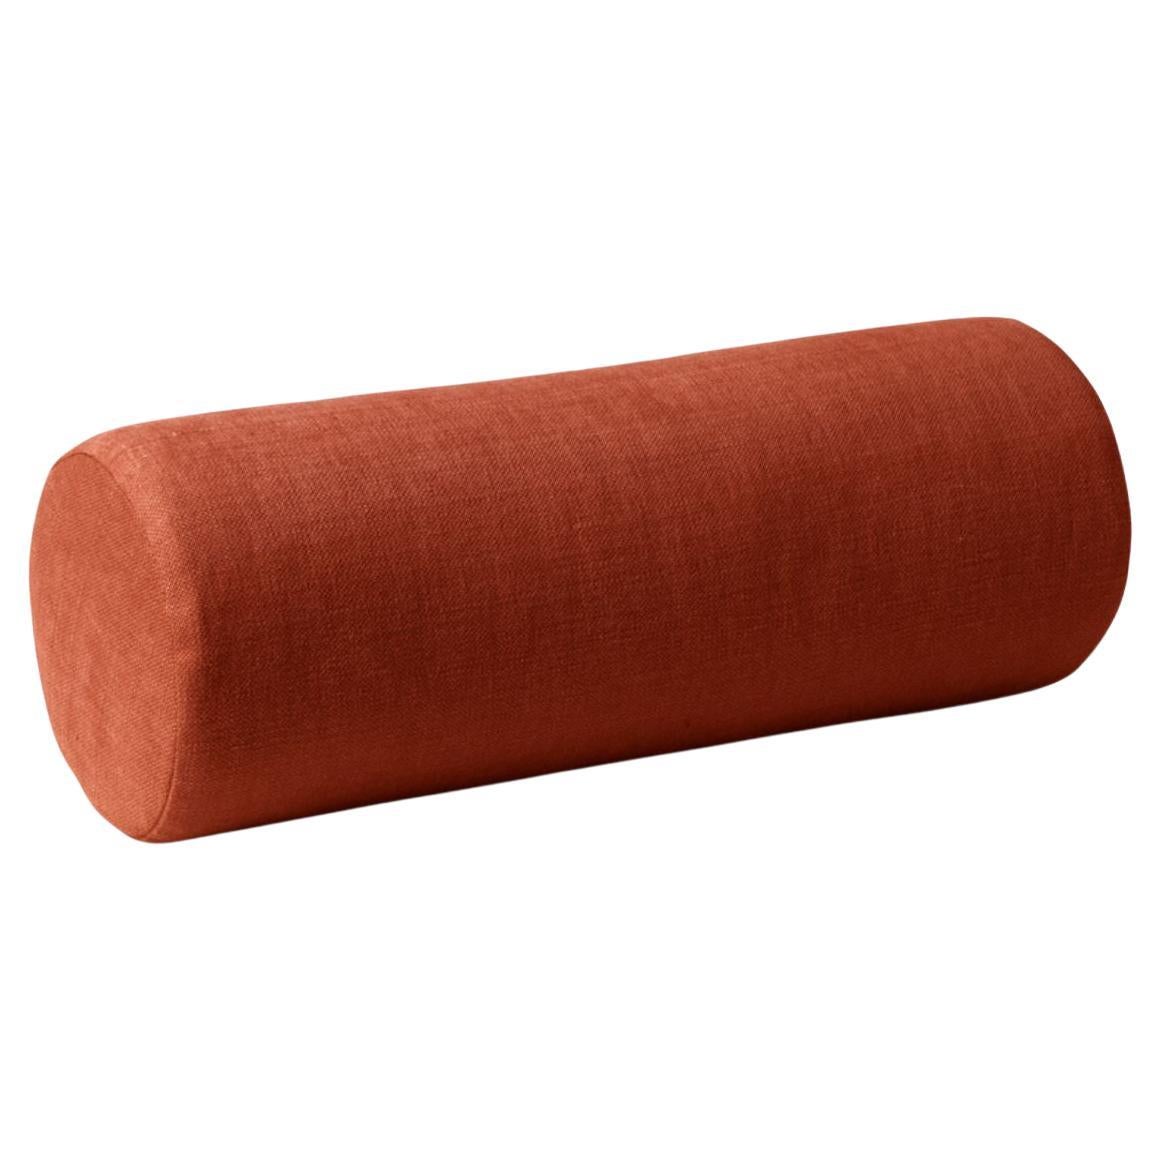 Galore Cushion Maple Red by Warm Nordic For Sale